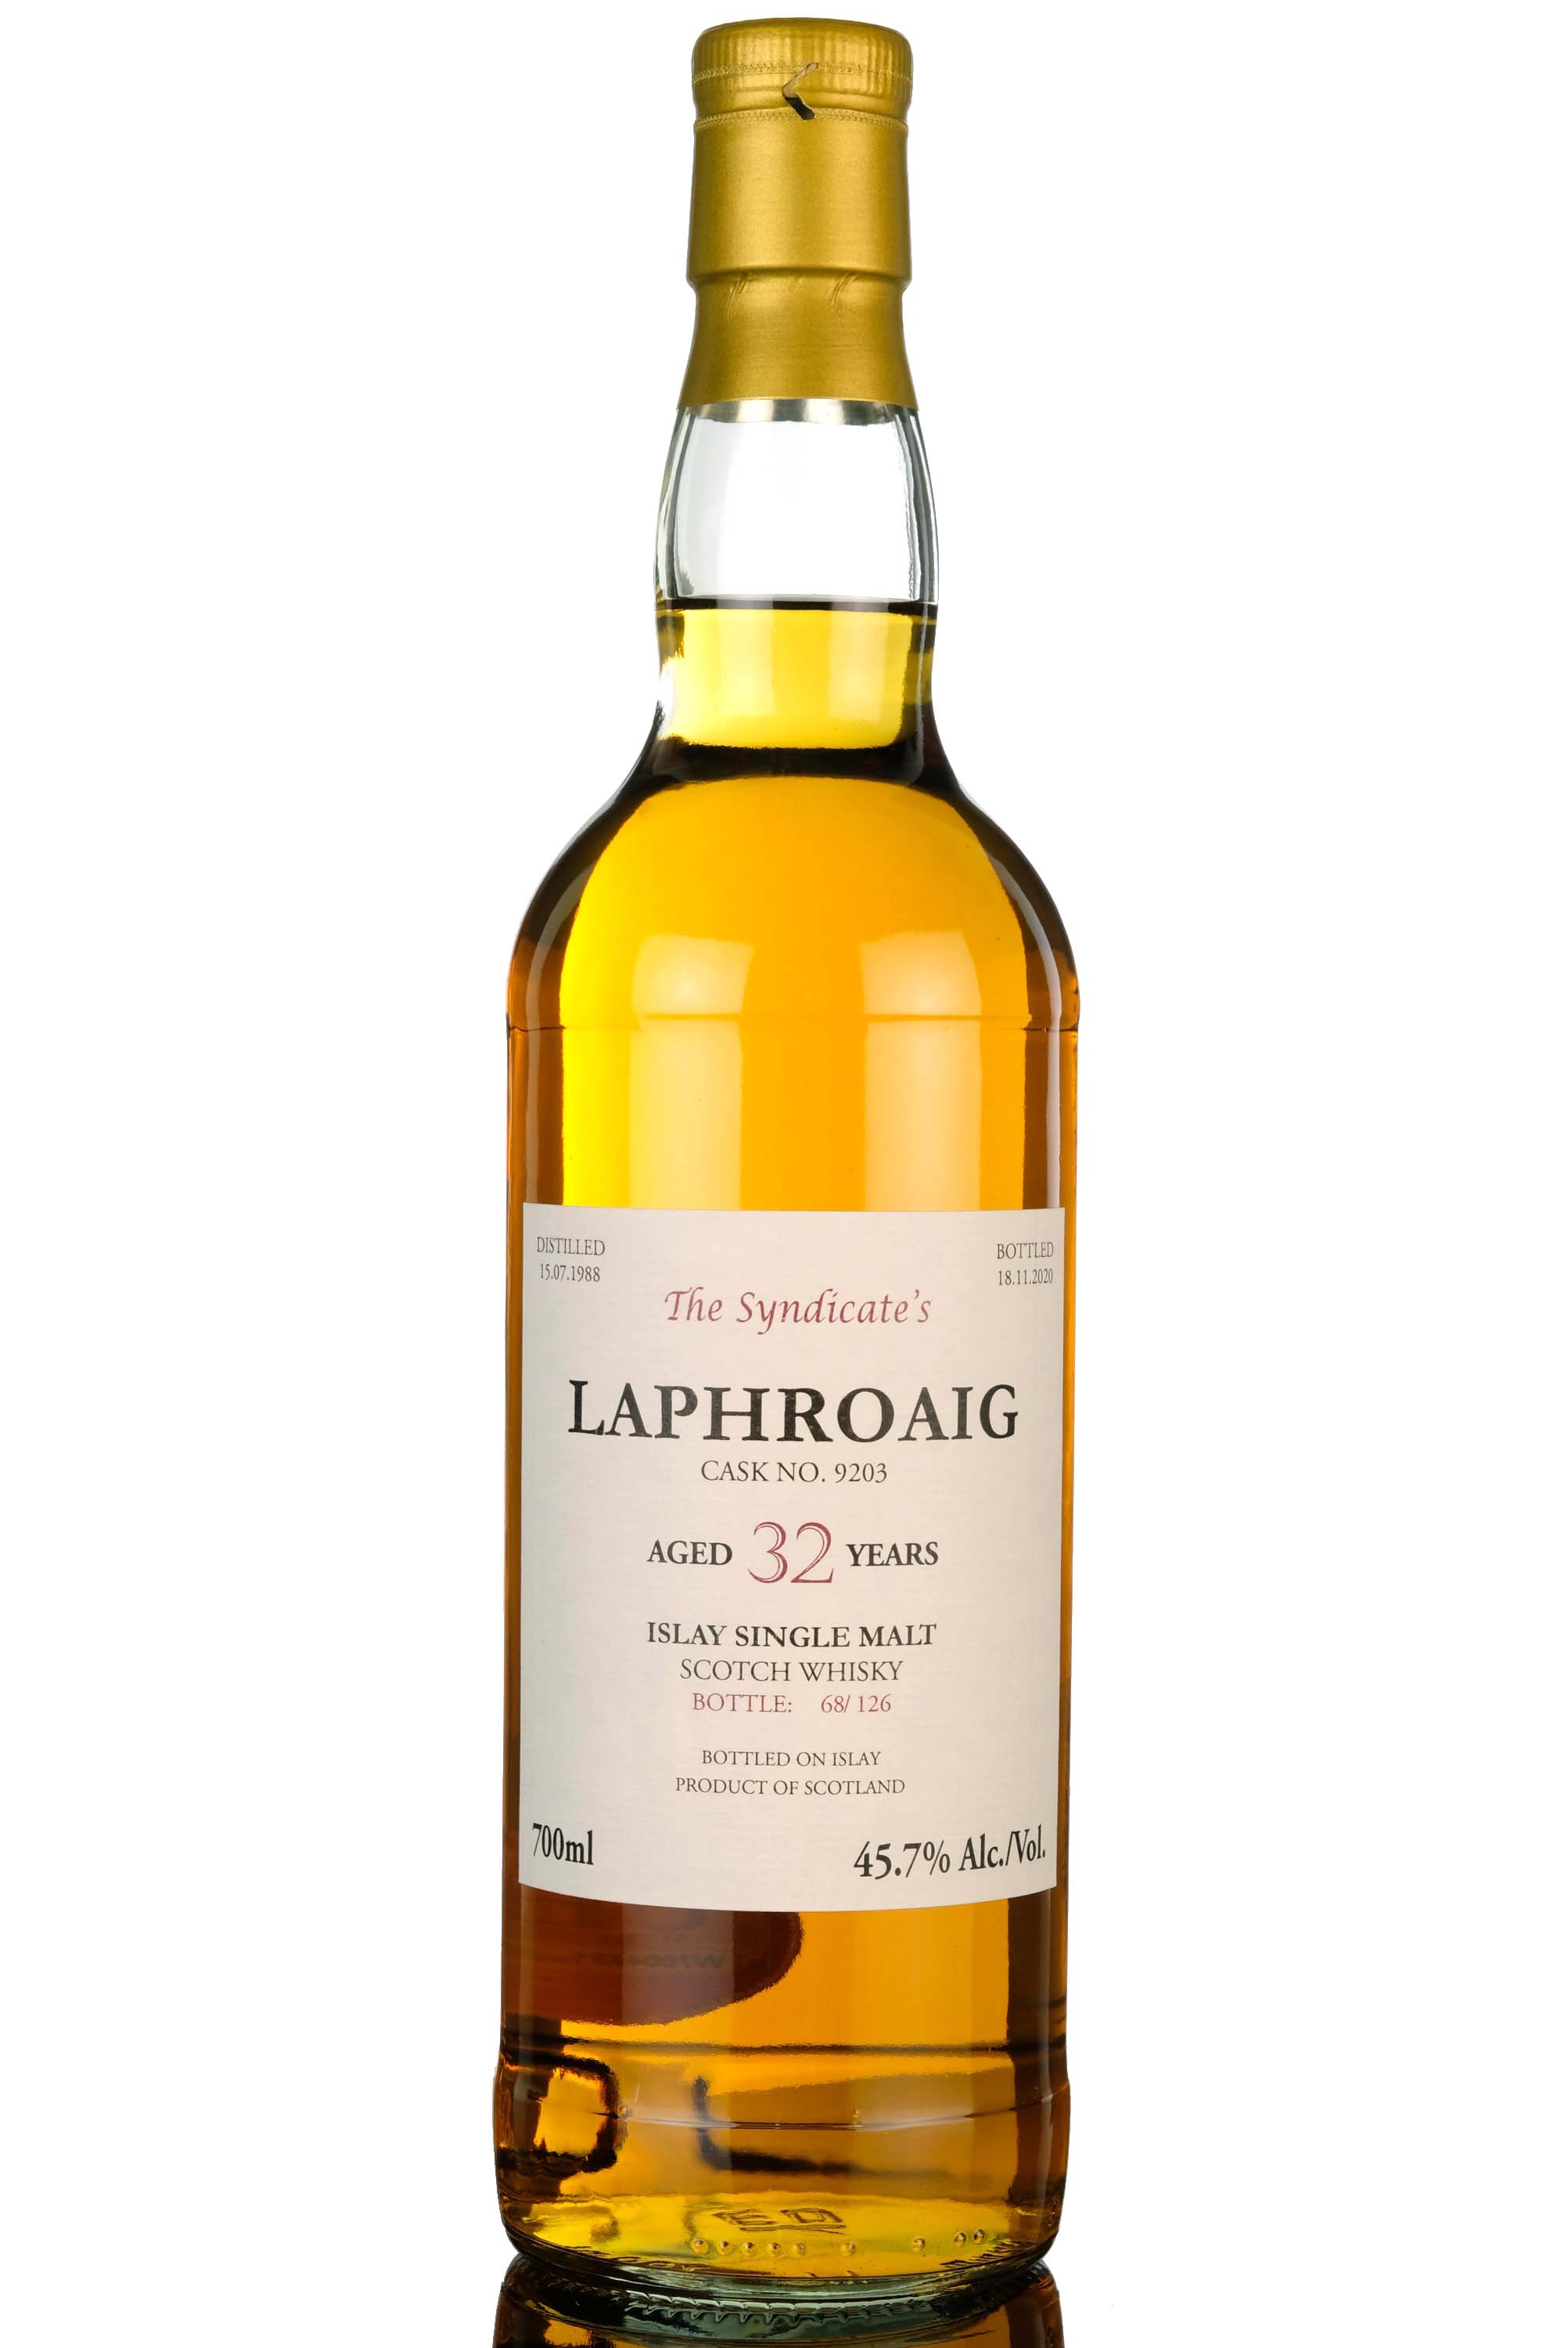 Laphroaig 1988-2020 - 32 Year Old - The Syndicate's - Single Cask 9203